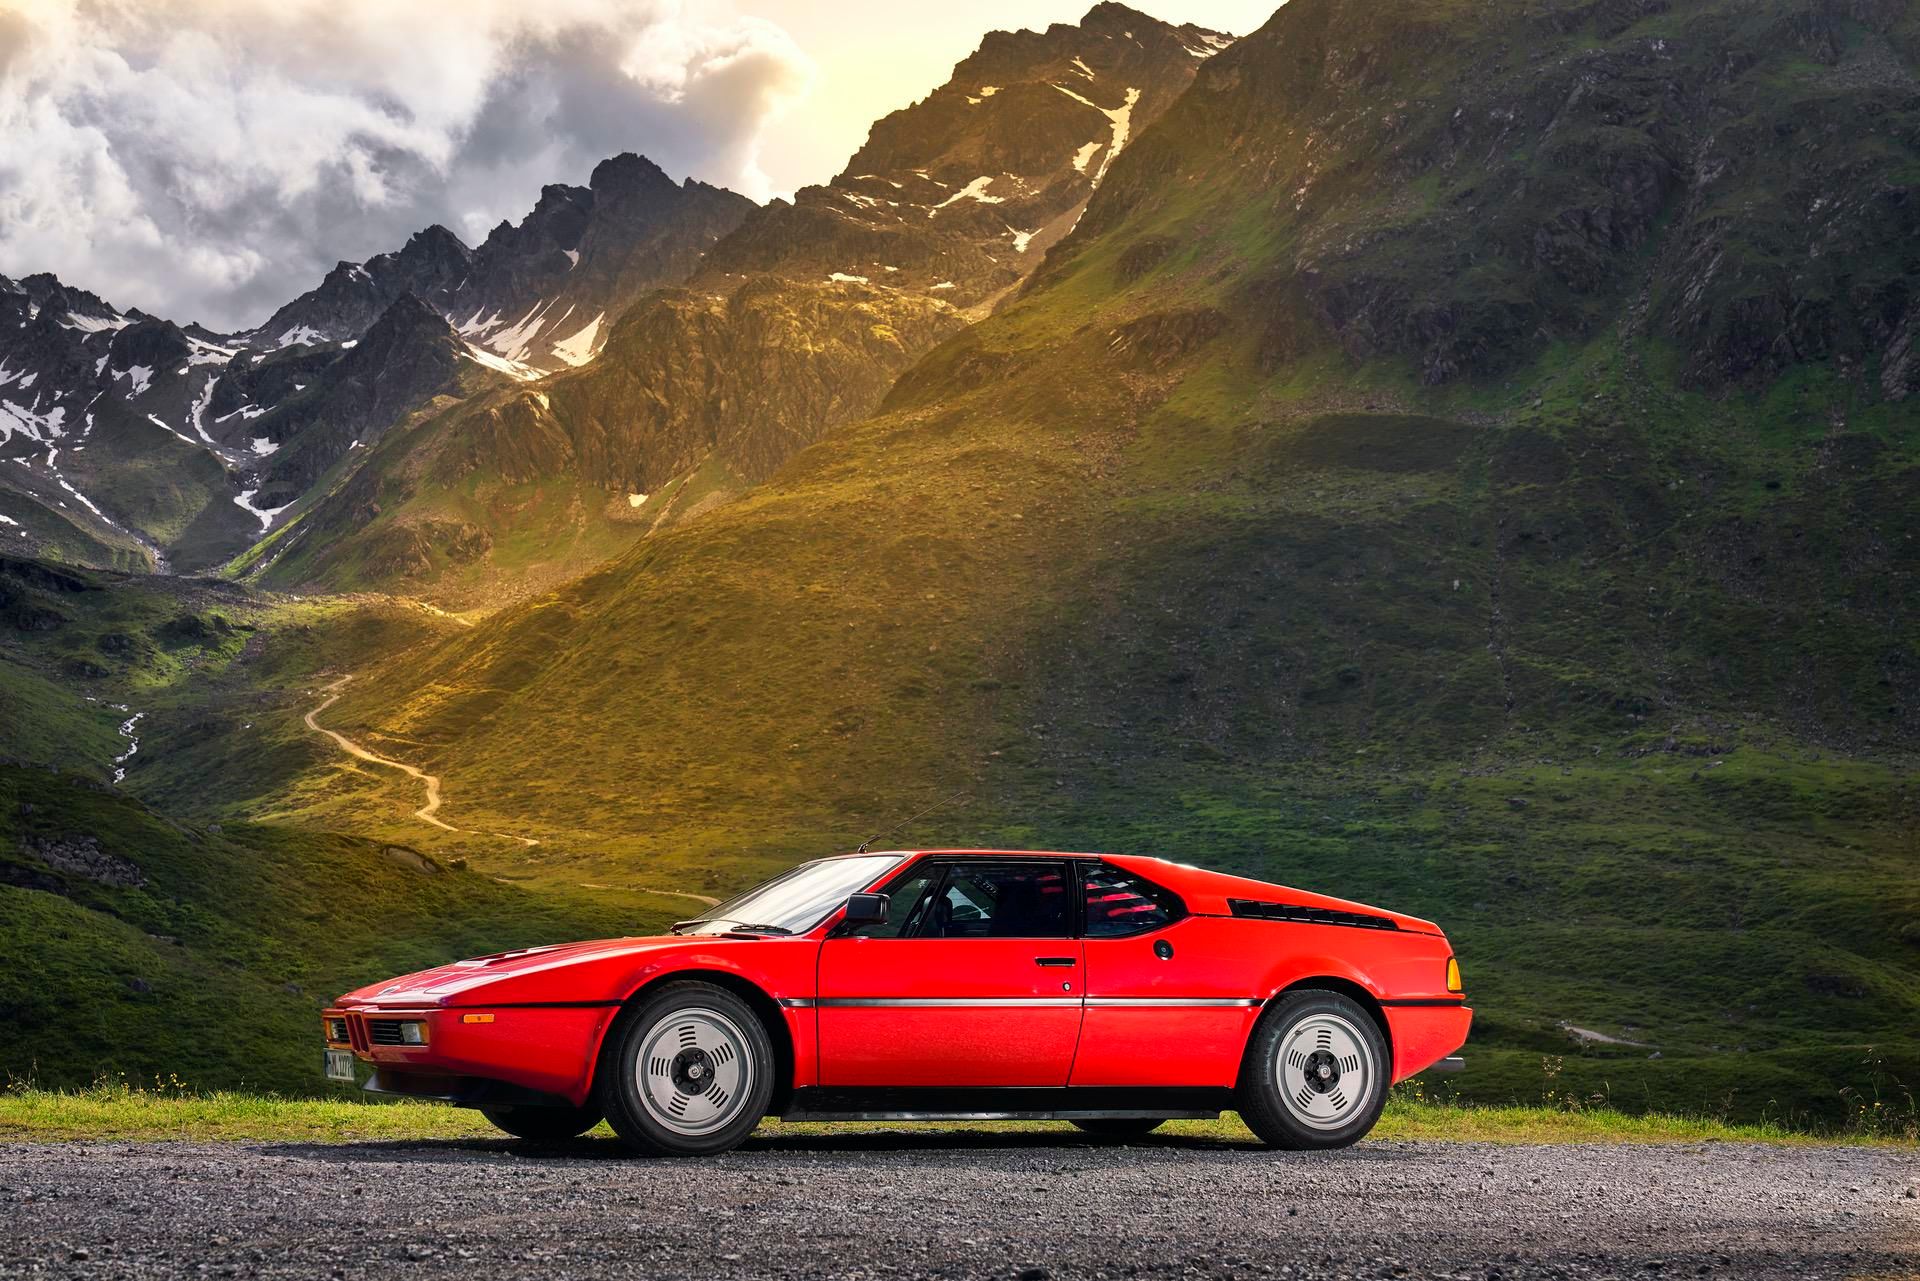 BMW-M1-red-supercar parked in front of mountains side view